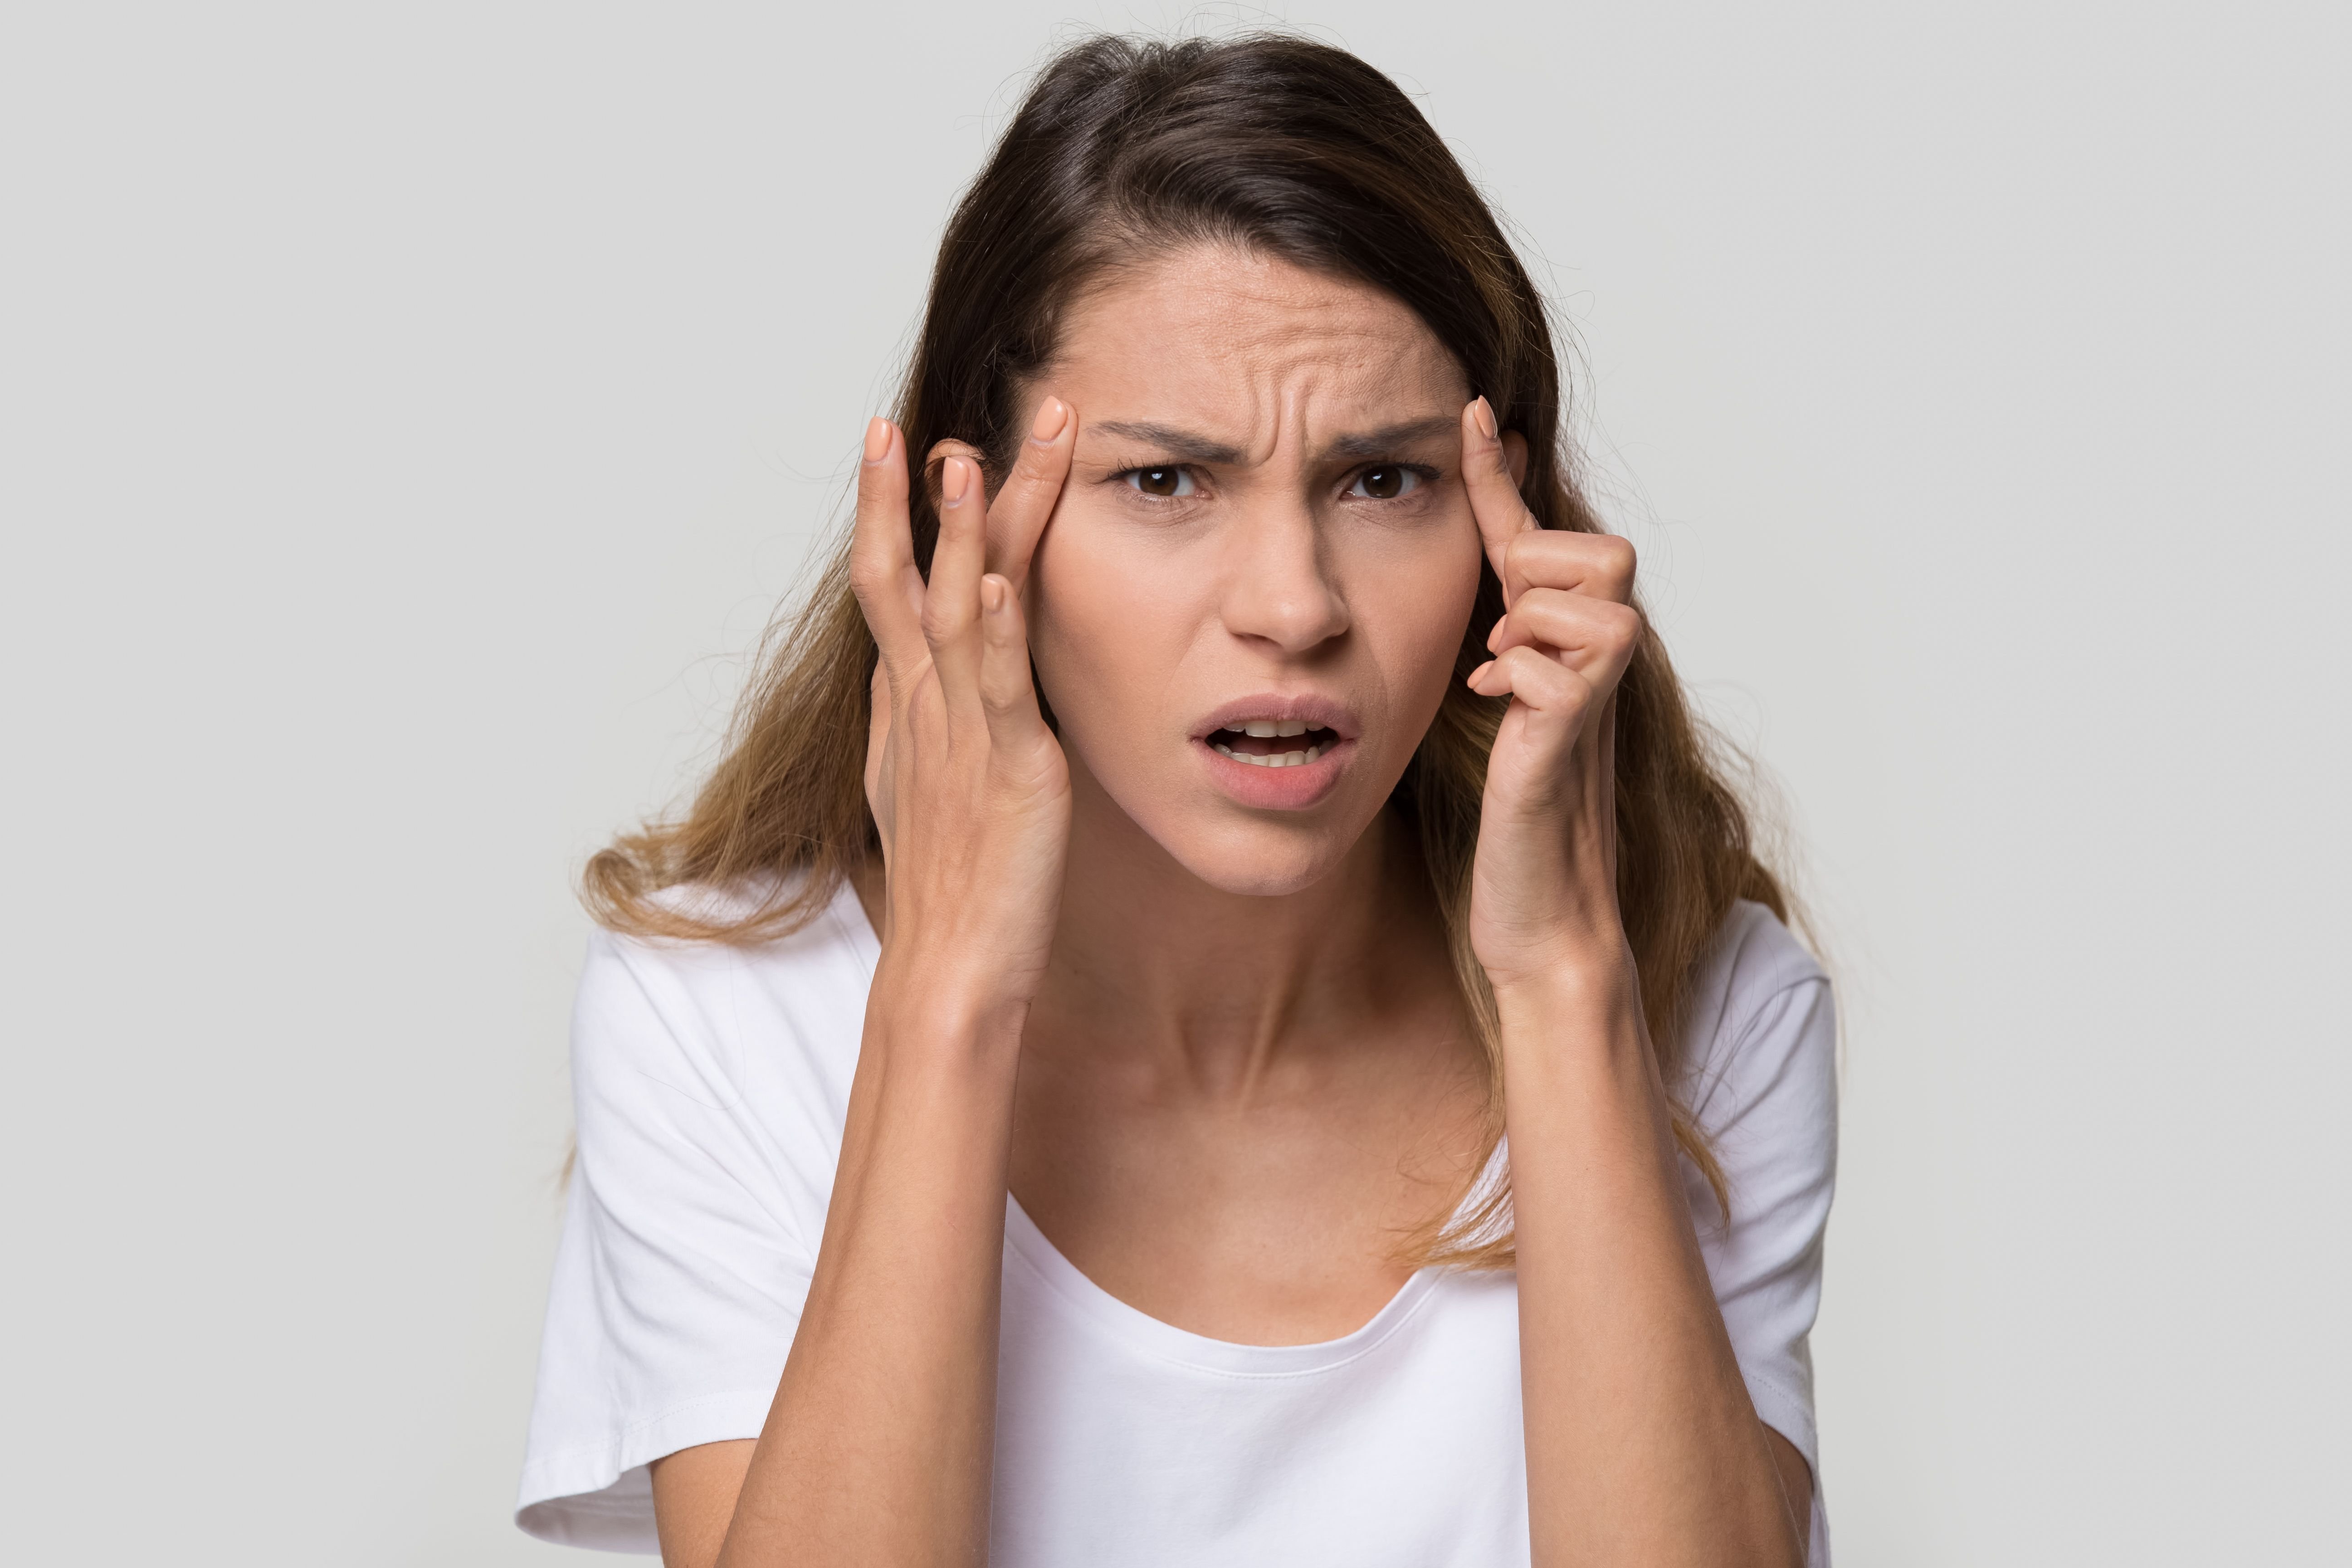 A woman fed up while holding her face. | Source: Shutterstock